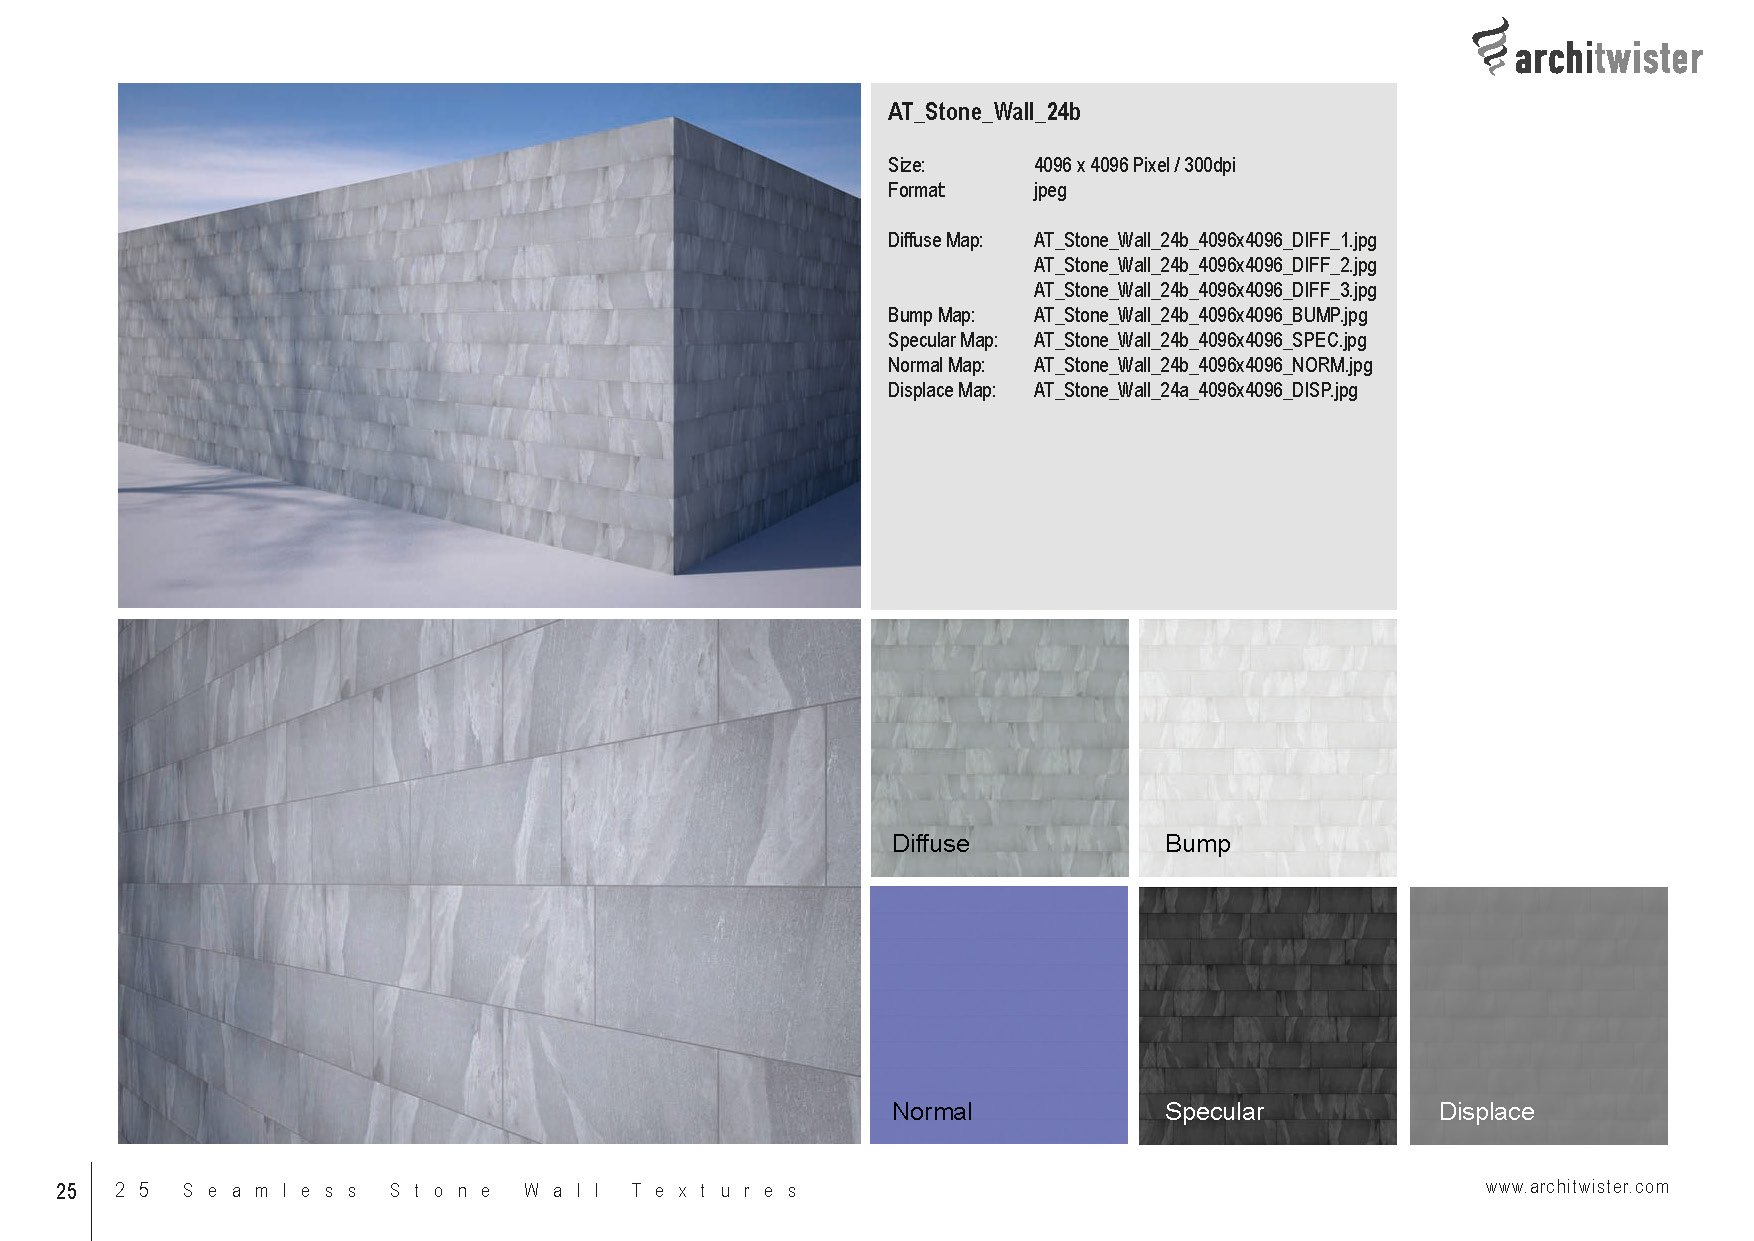 at stone wall textures catalog 01 seite 26 907